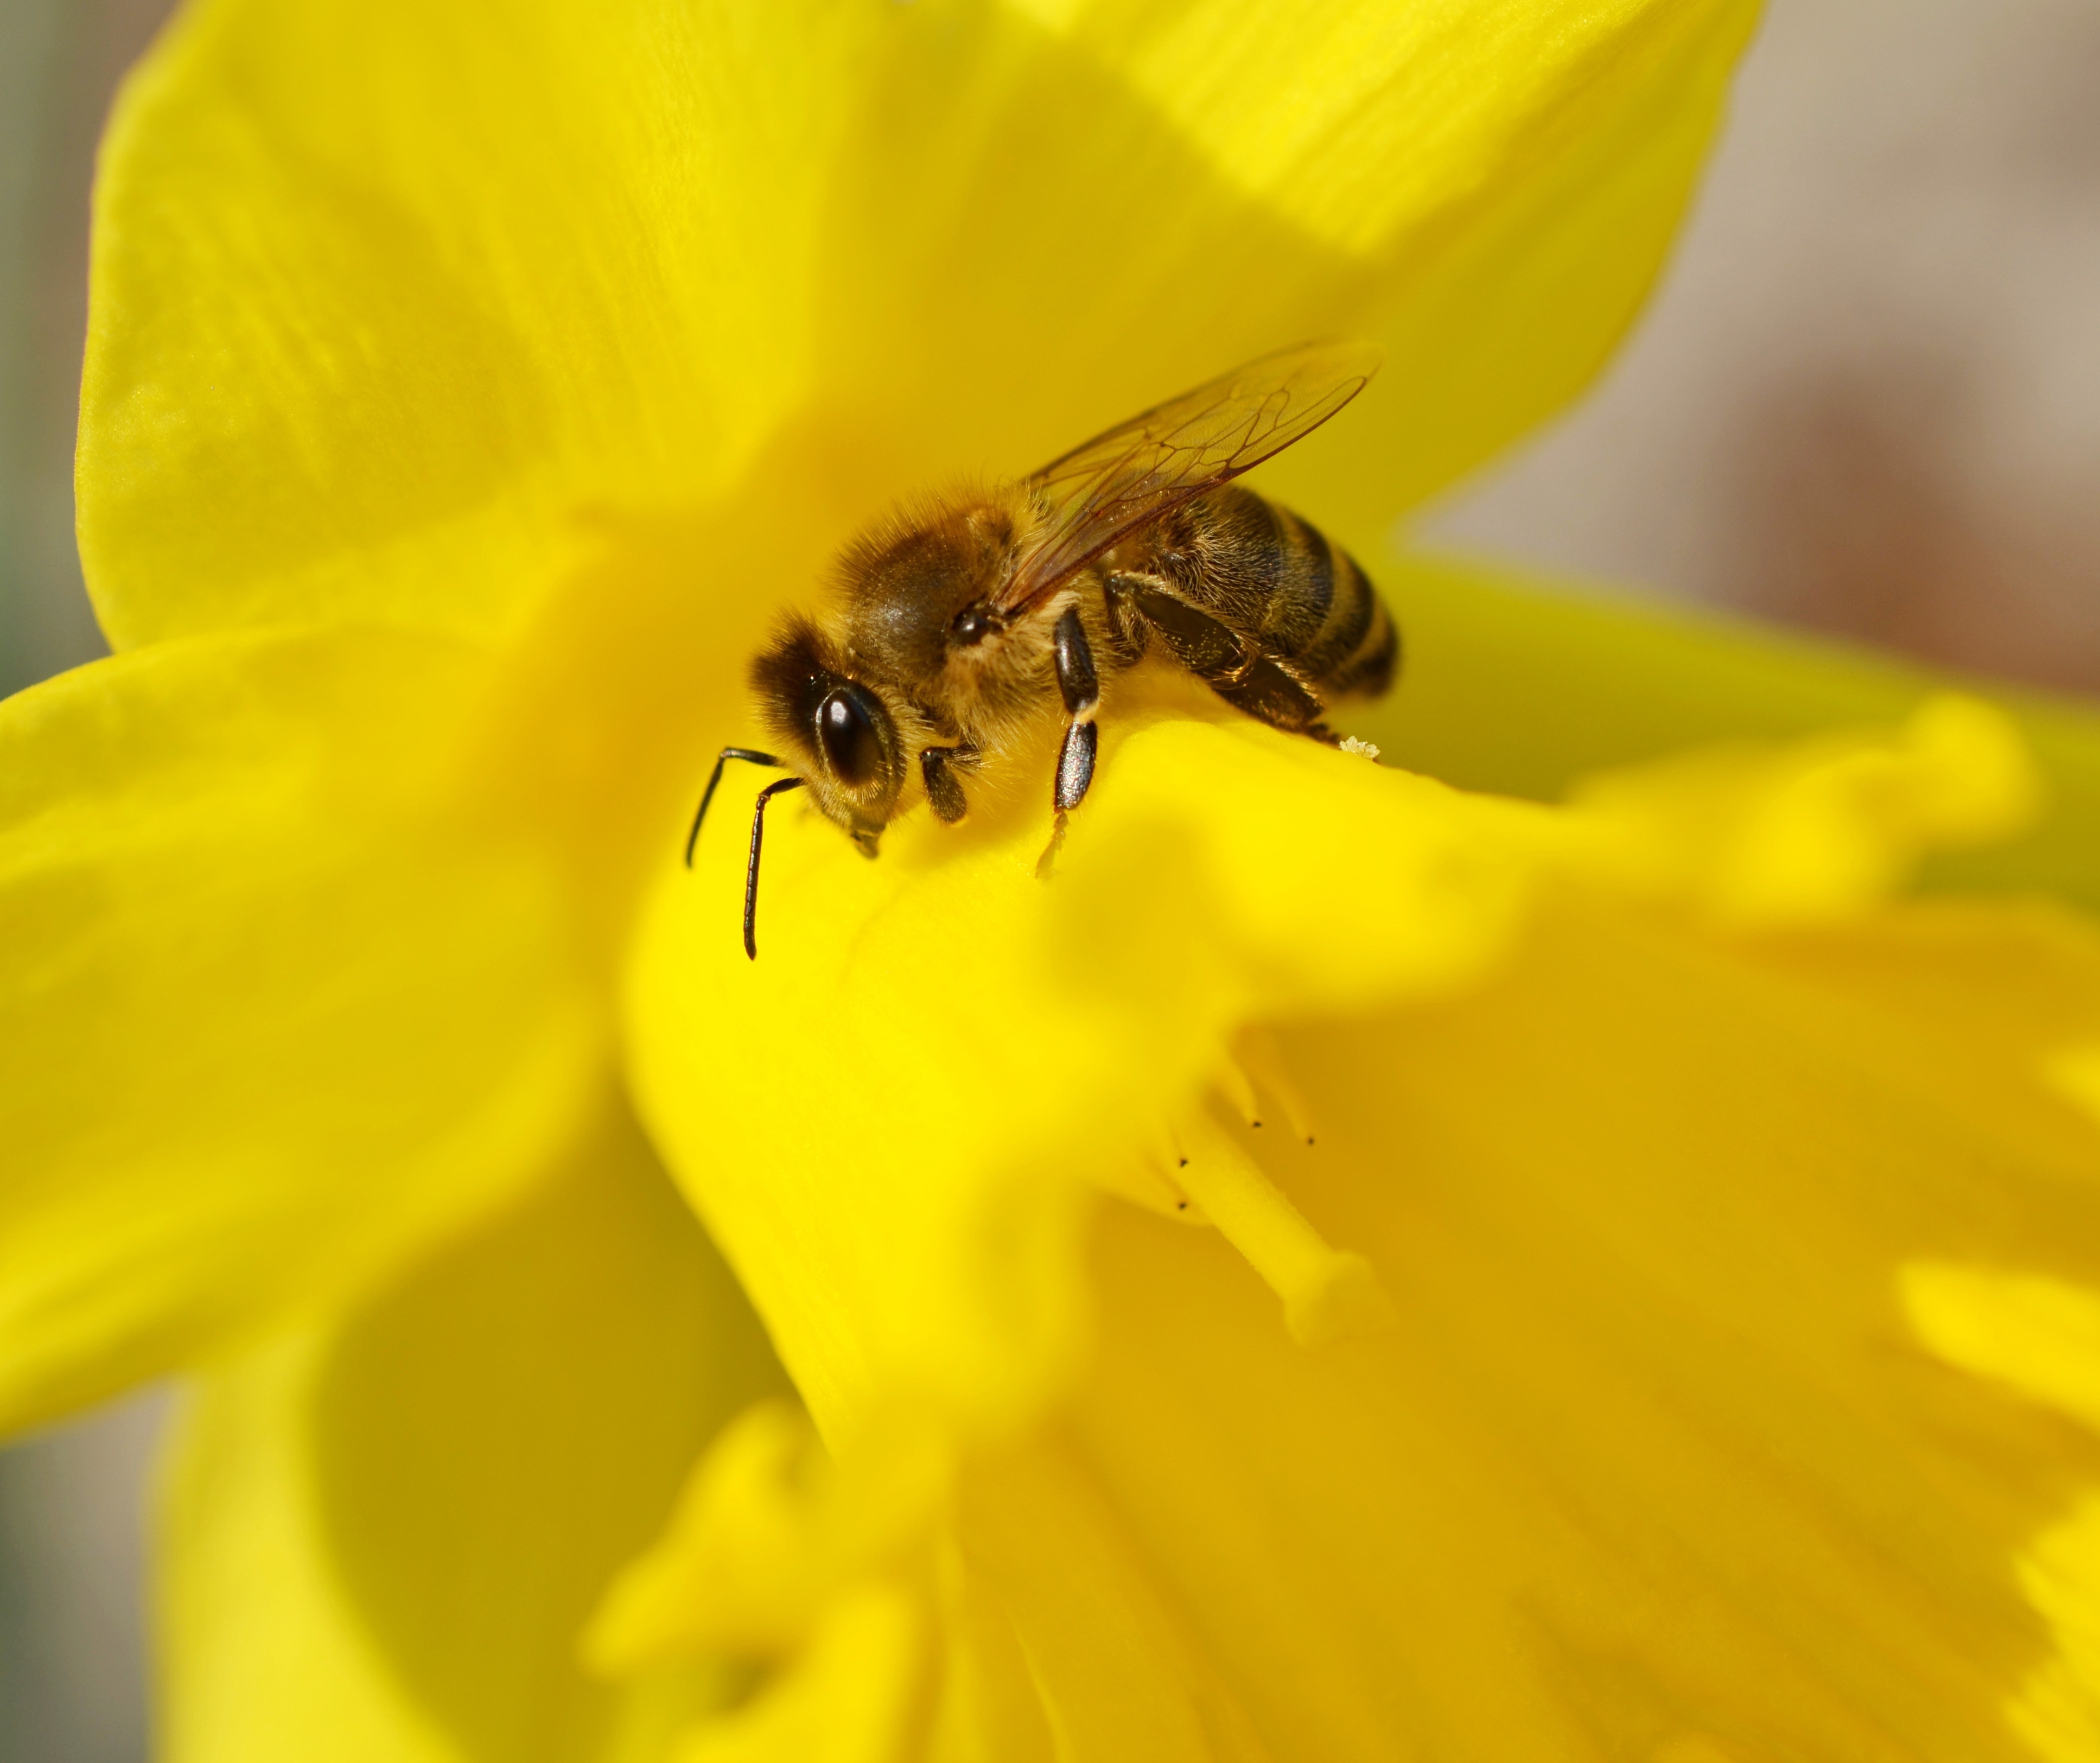 Insect, Yellow, Bee, Macro, Daffodil, flower, insect